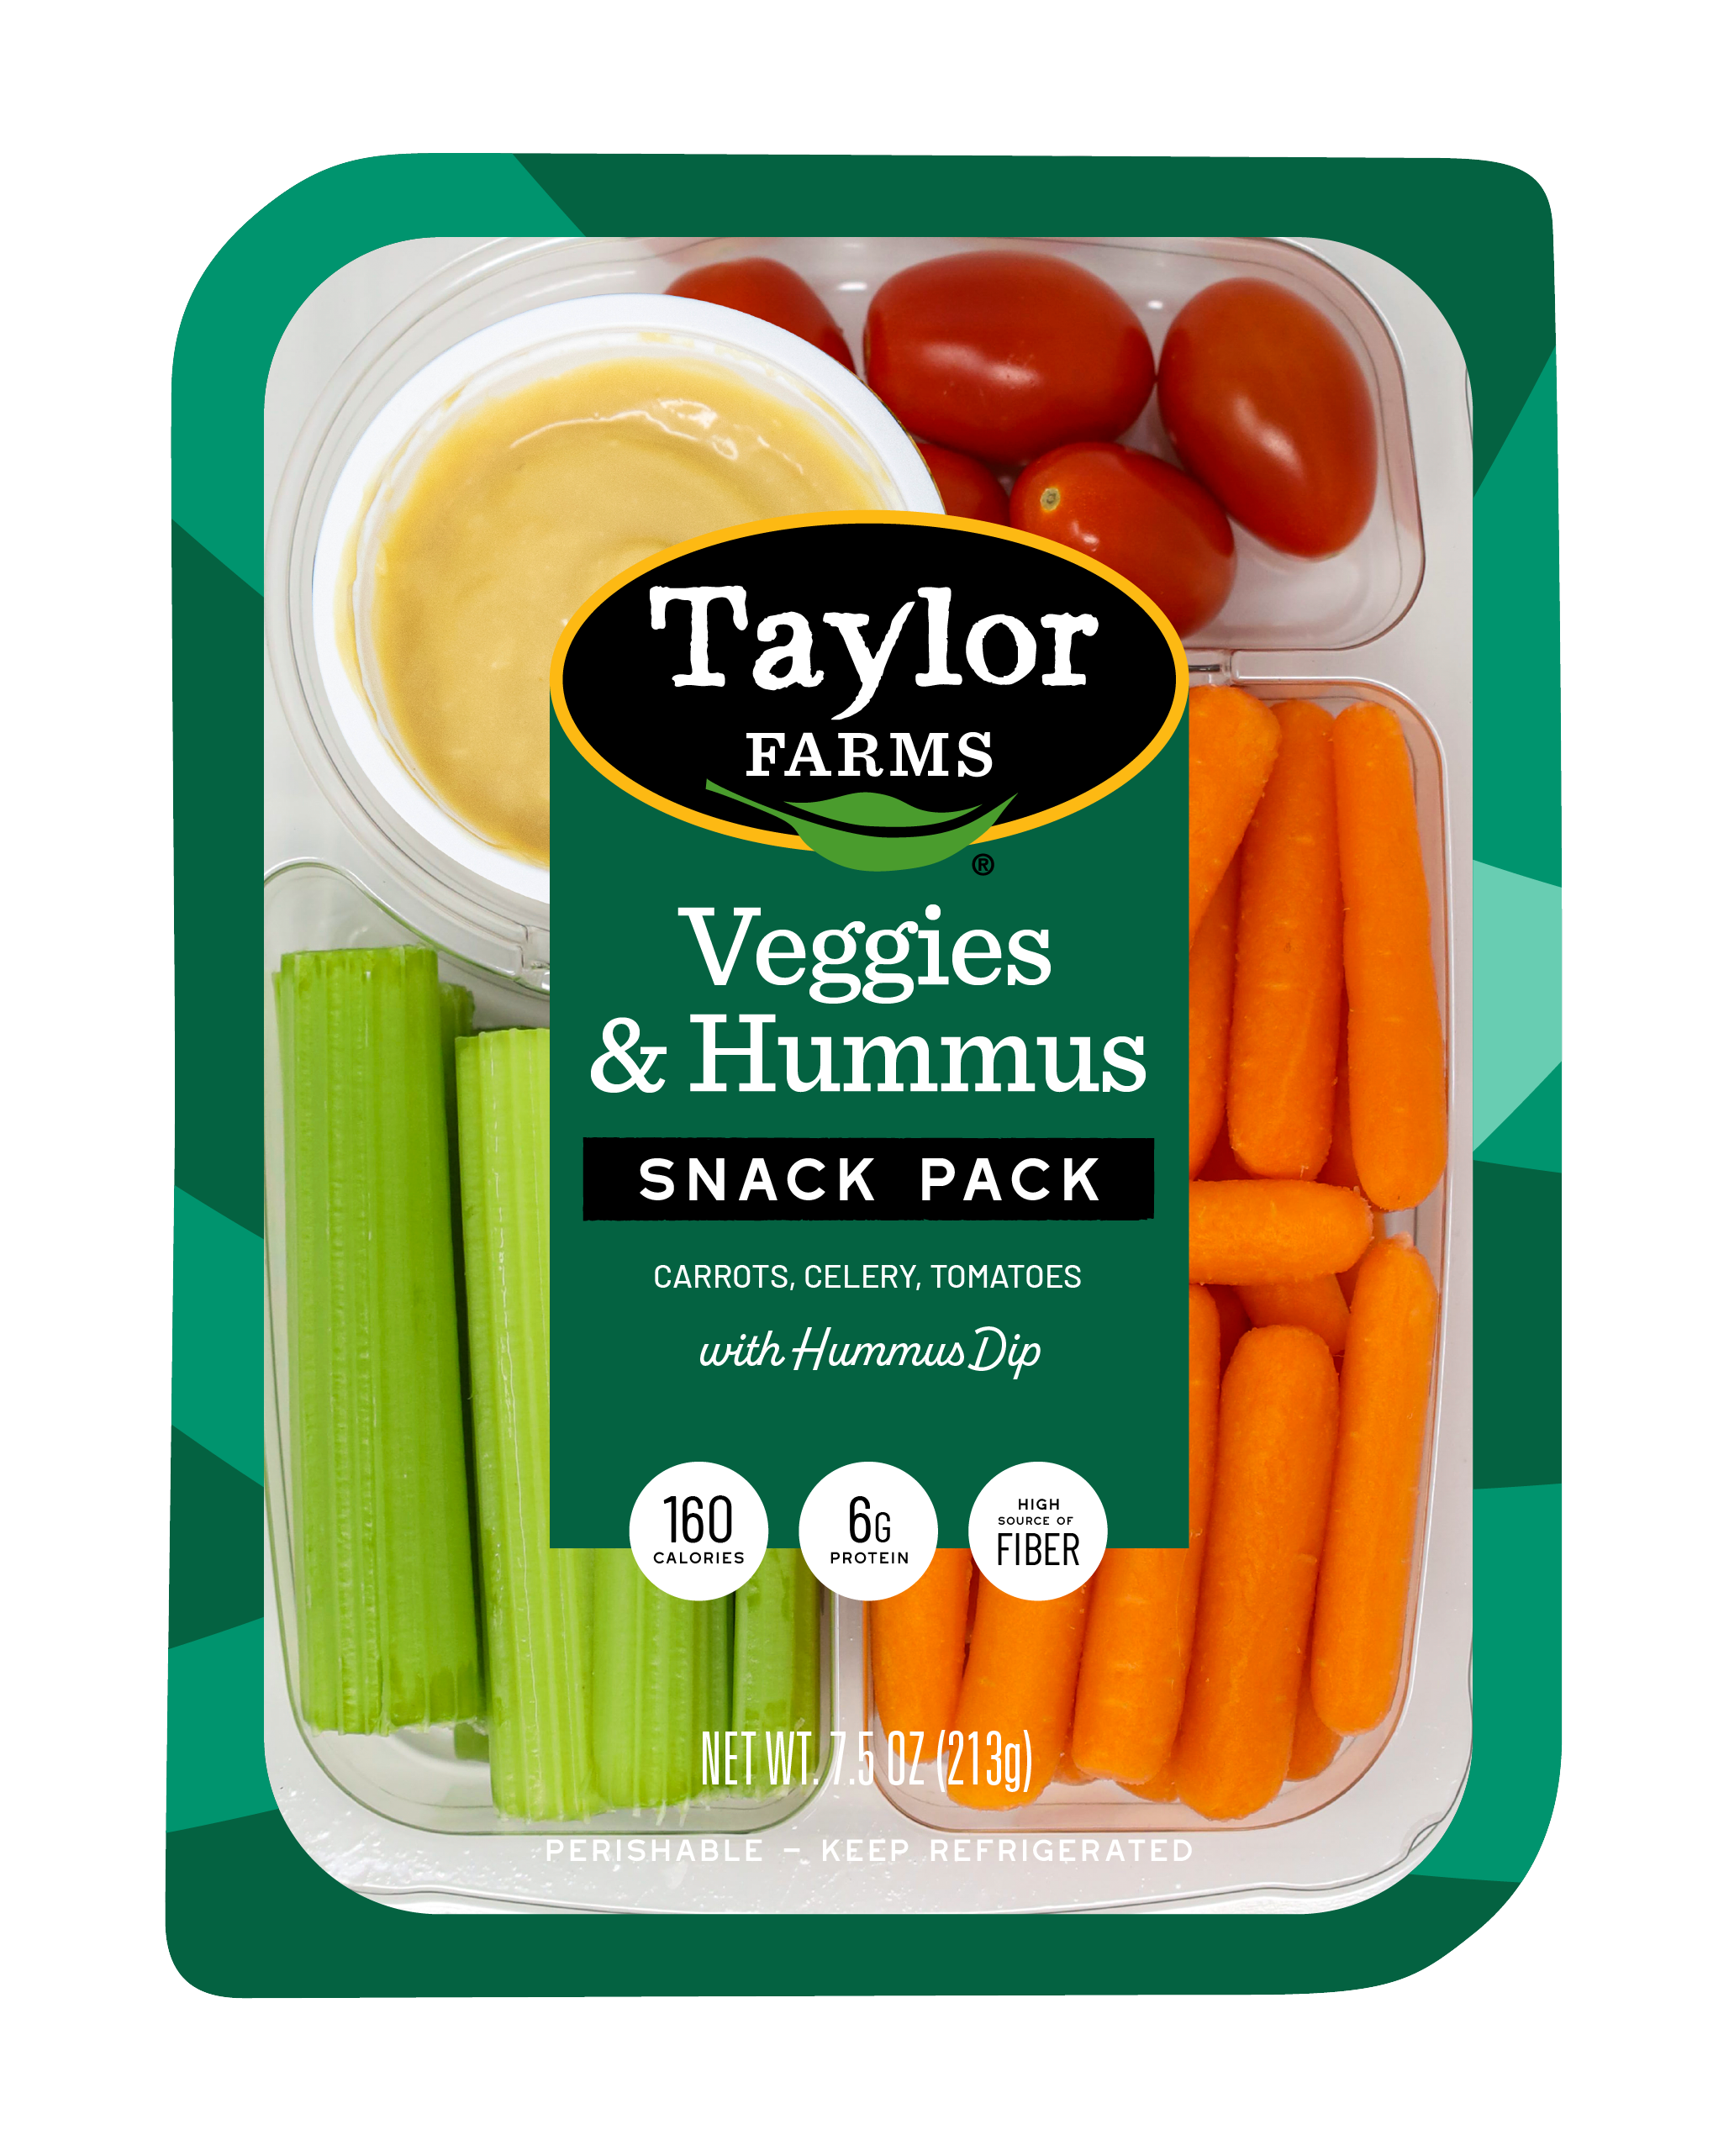 The Taylor Farms Veggies & Hummus Snack Pack package, showing celery stalks, baby carrots, grape tomatoes, and hummus dip.